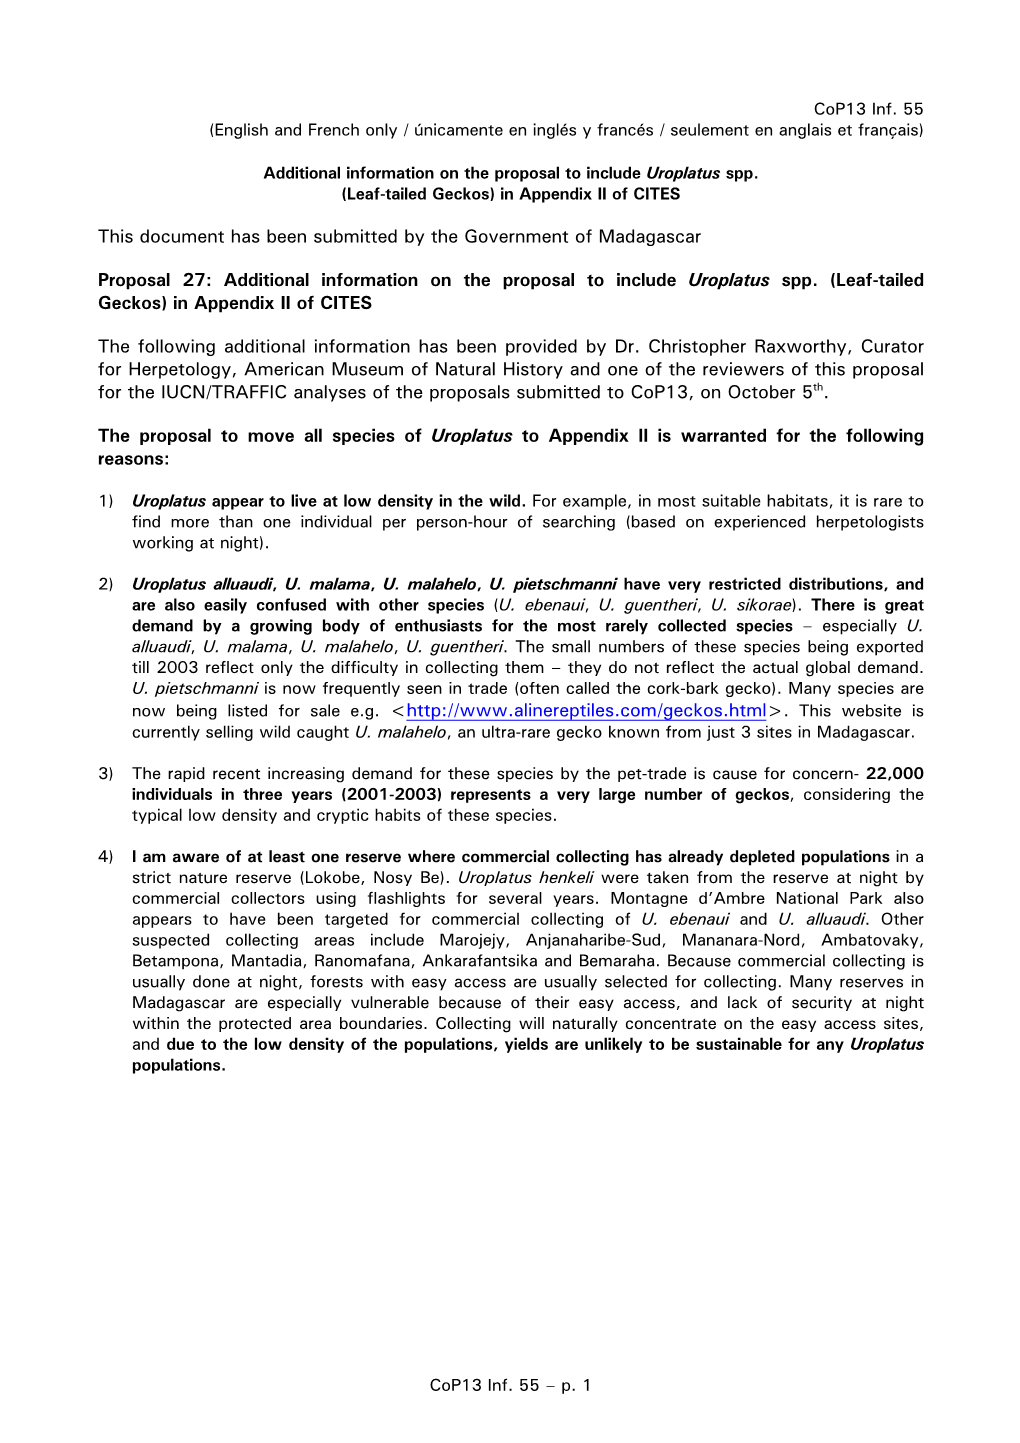 This Document Has Been Submitted by the Government of Madagascar Proposal 27